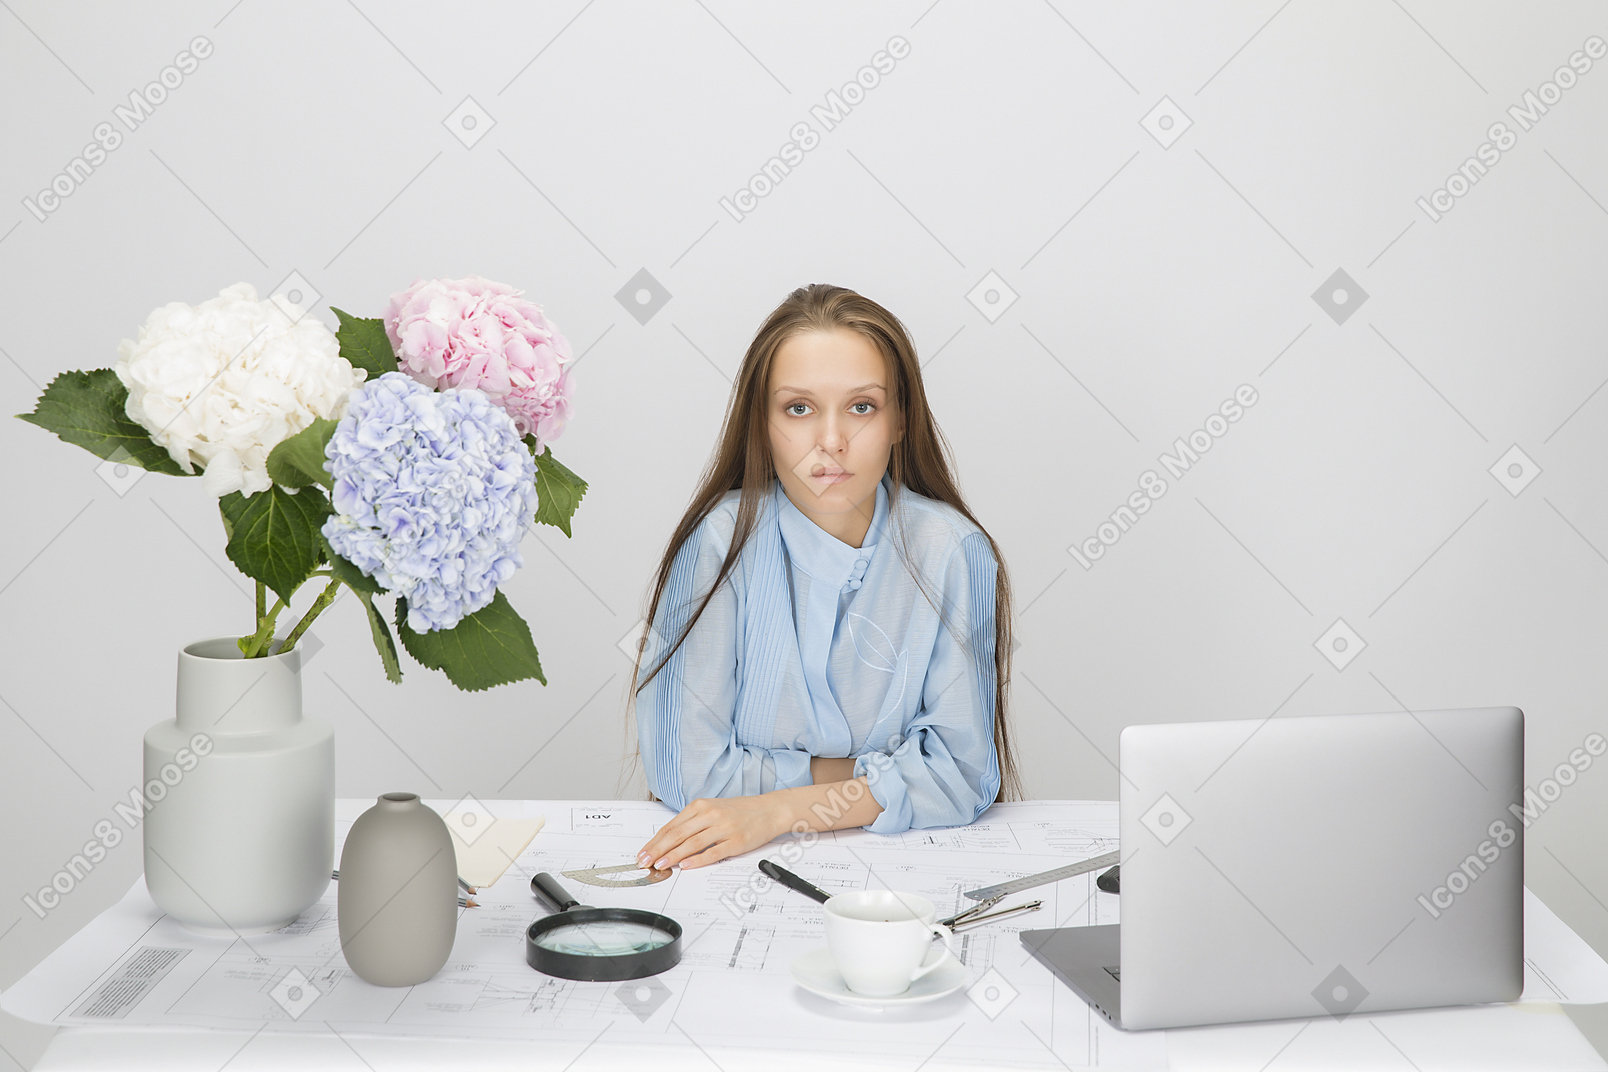 Young girl sitting at the table with laptop, coffee and vase with flowers